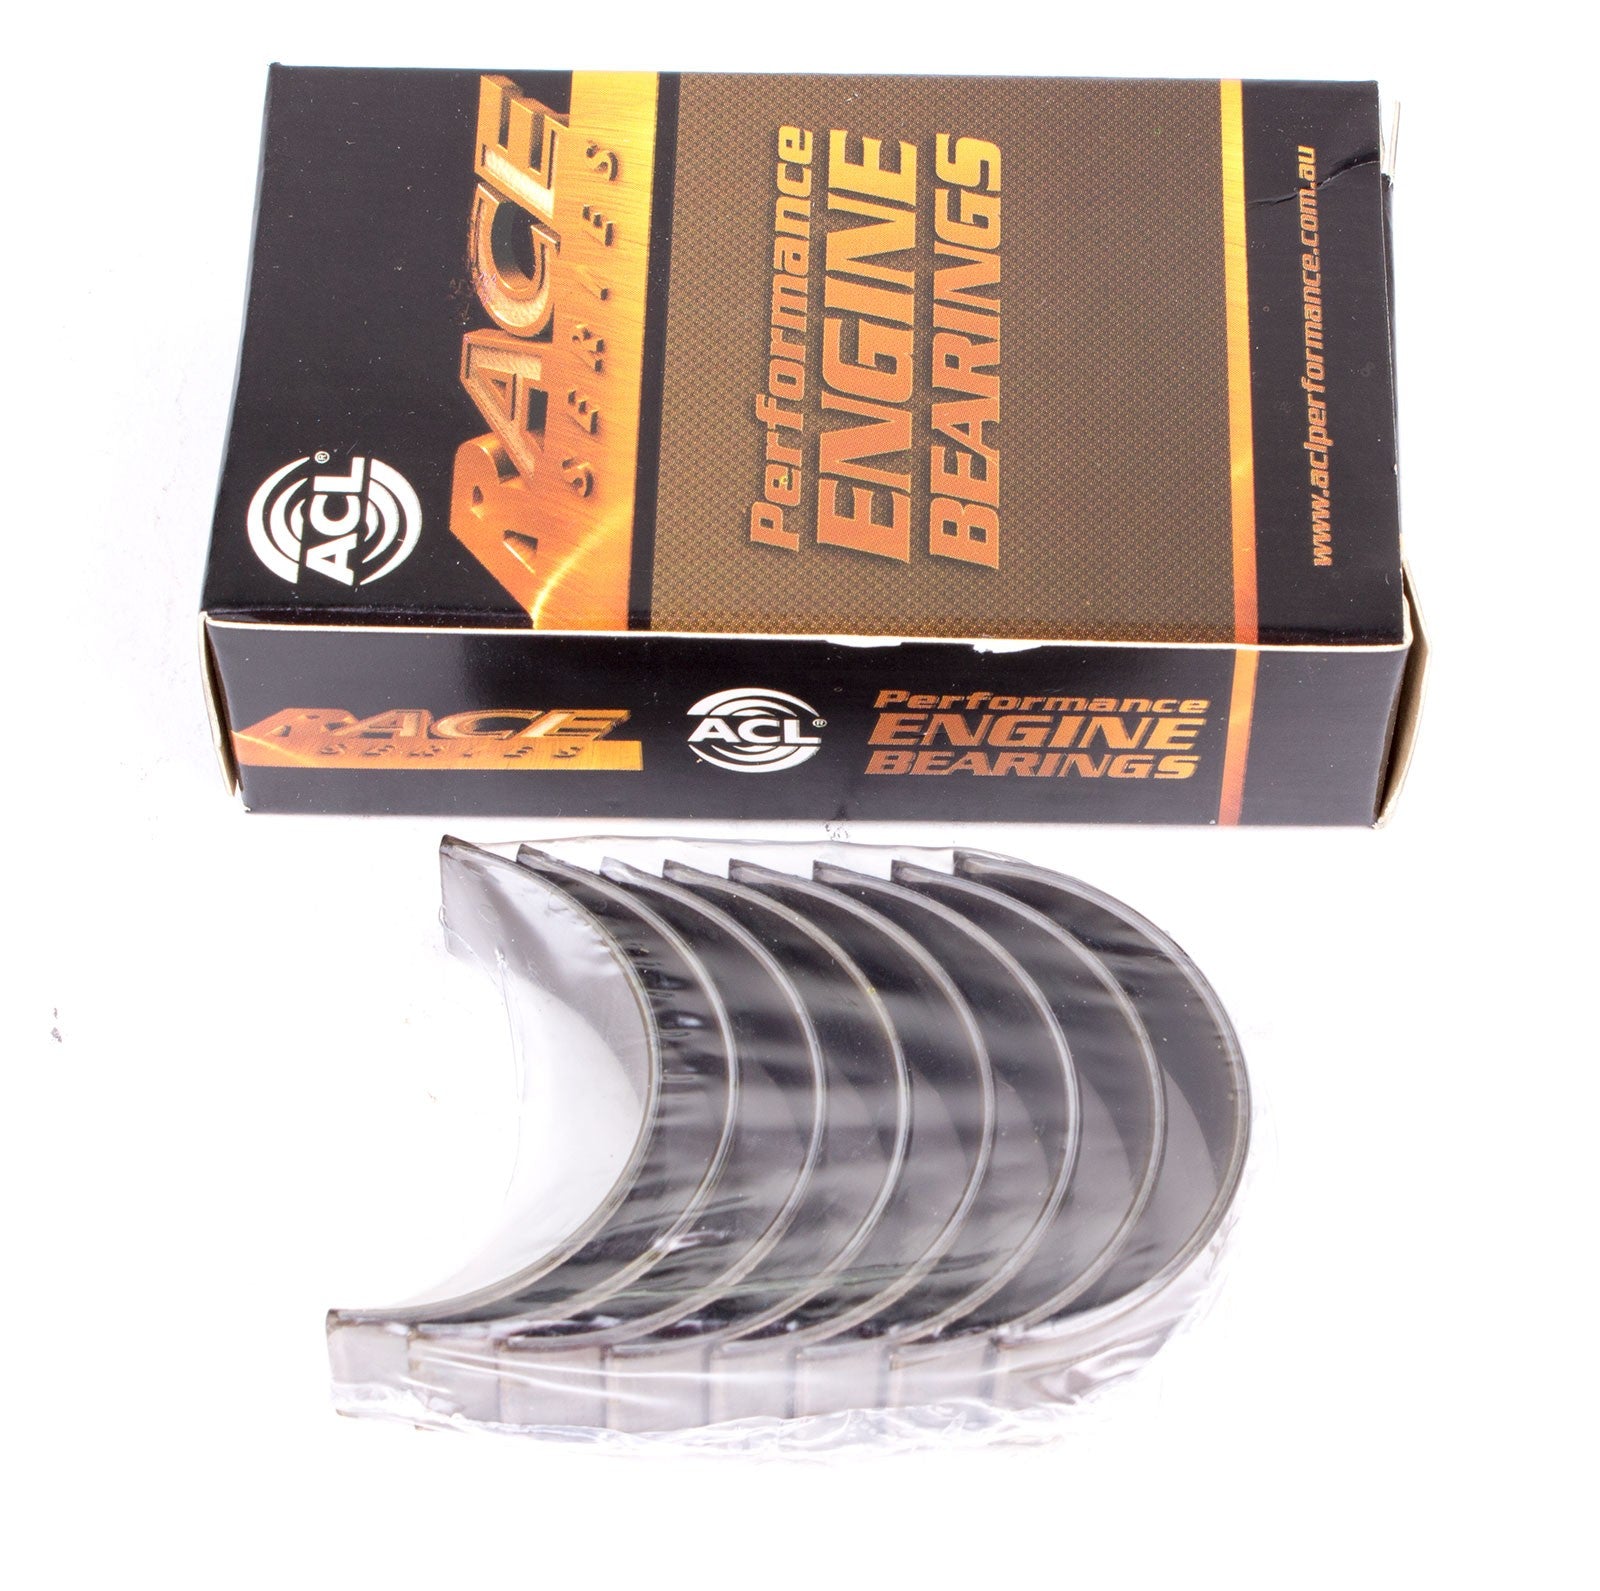 ACL 4M7330H-.25 Main bearing set (ACL Race Series) Photo-0 